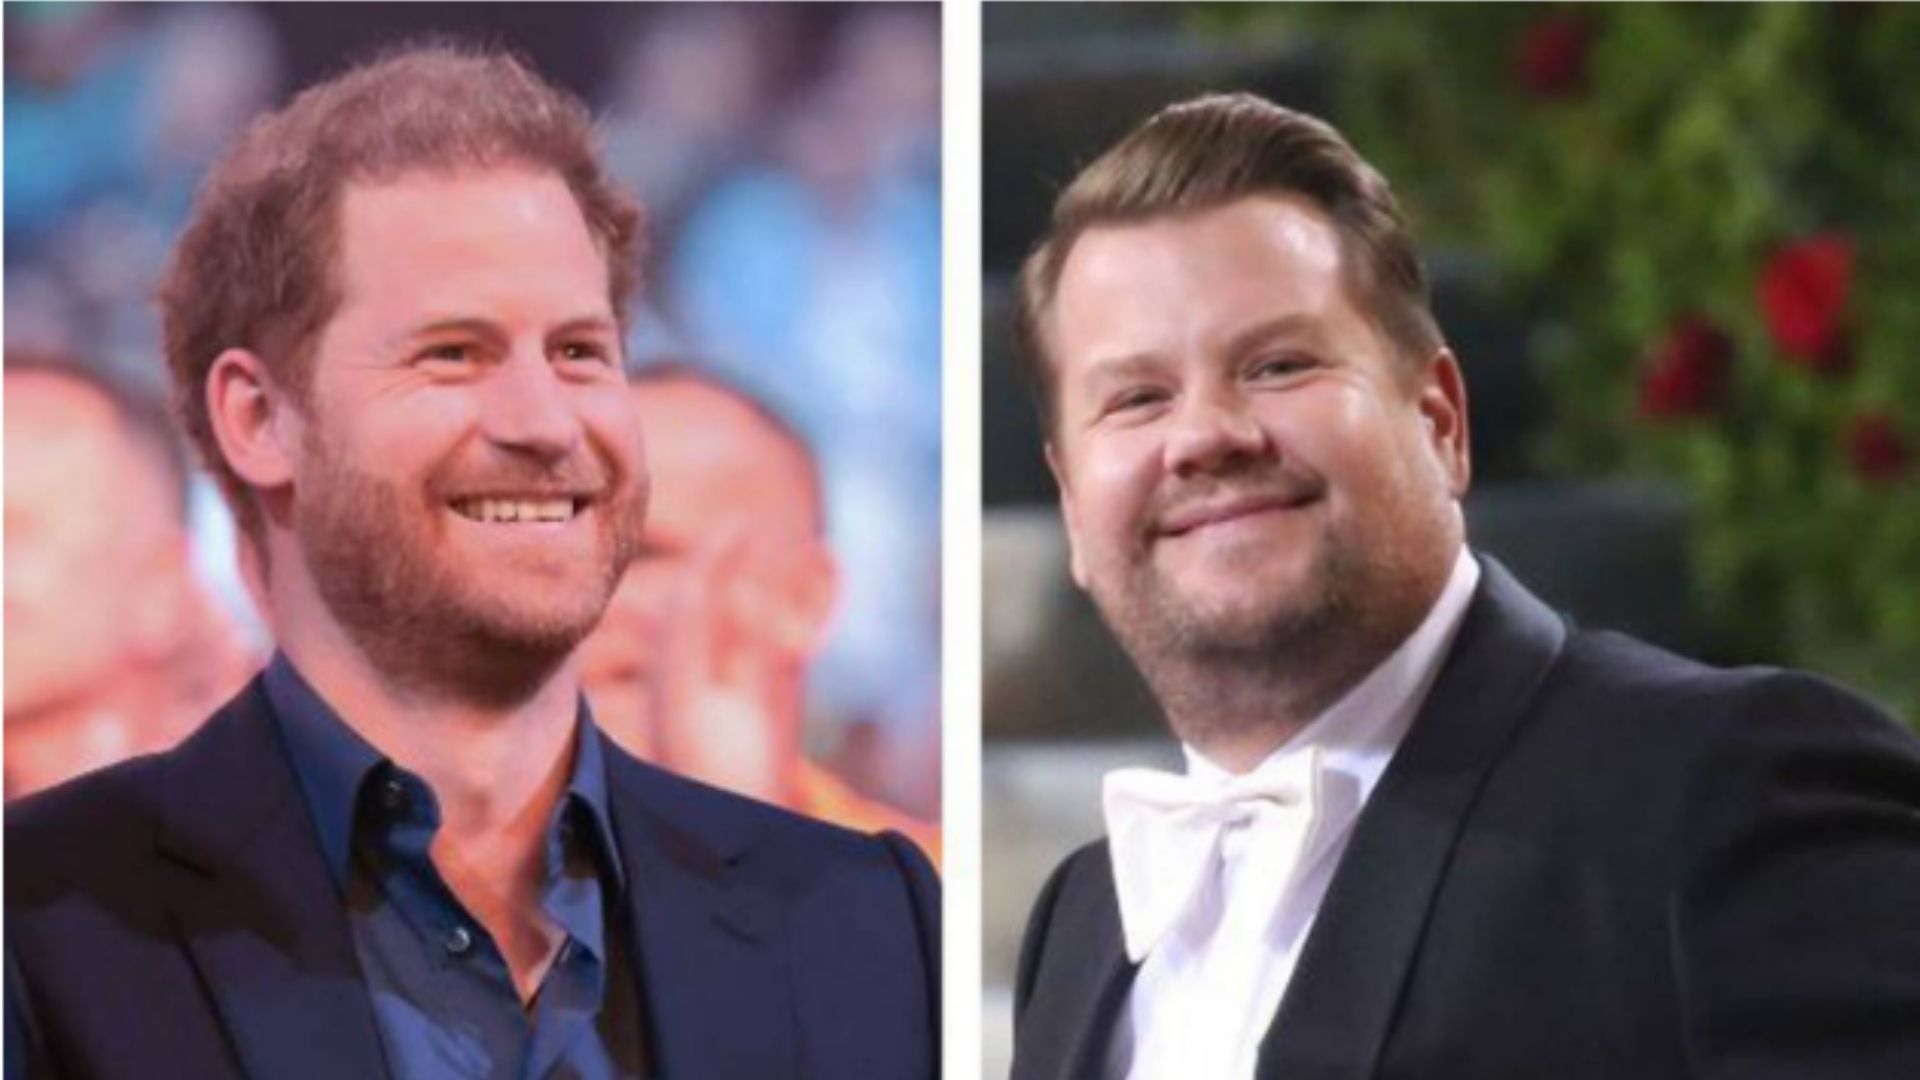 James Corden uncovers dear kinship with Prince Harry and Meghan Markle